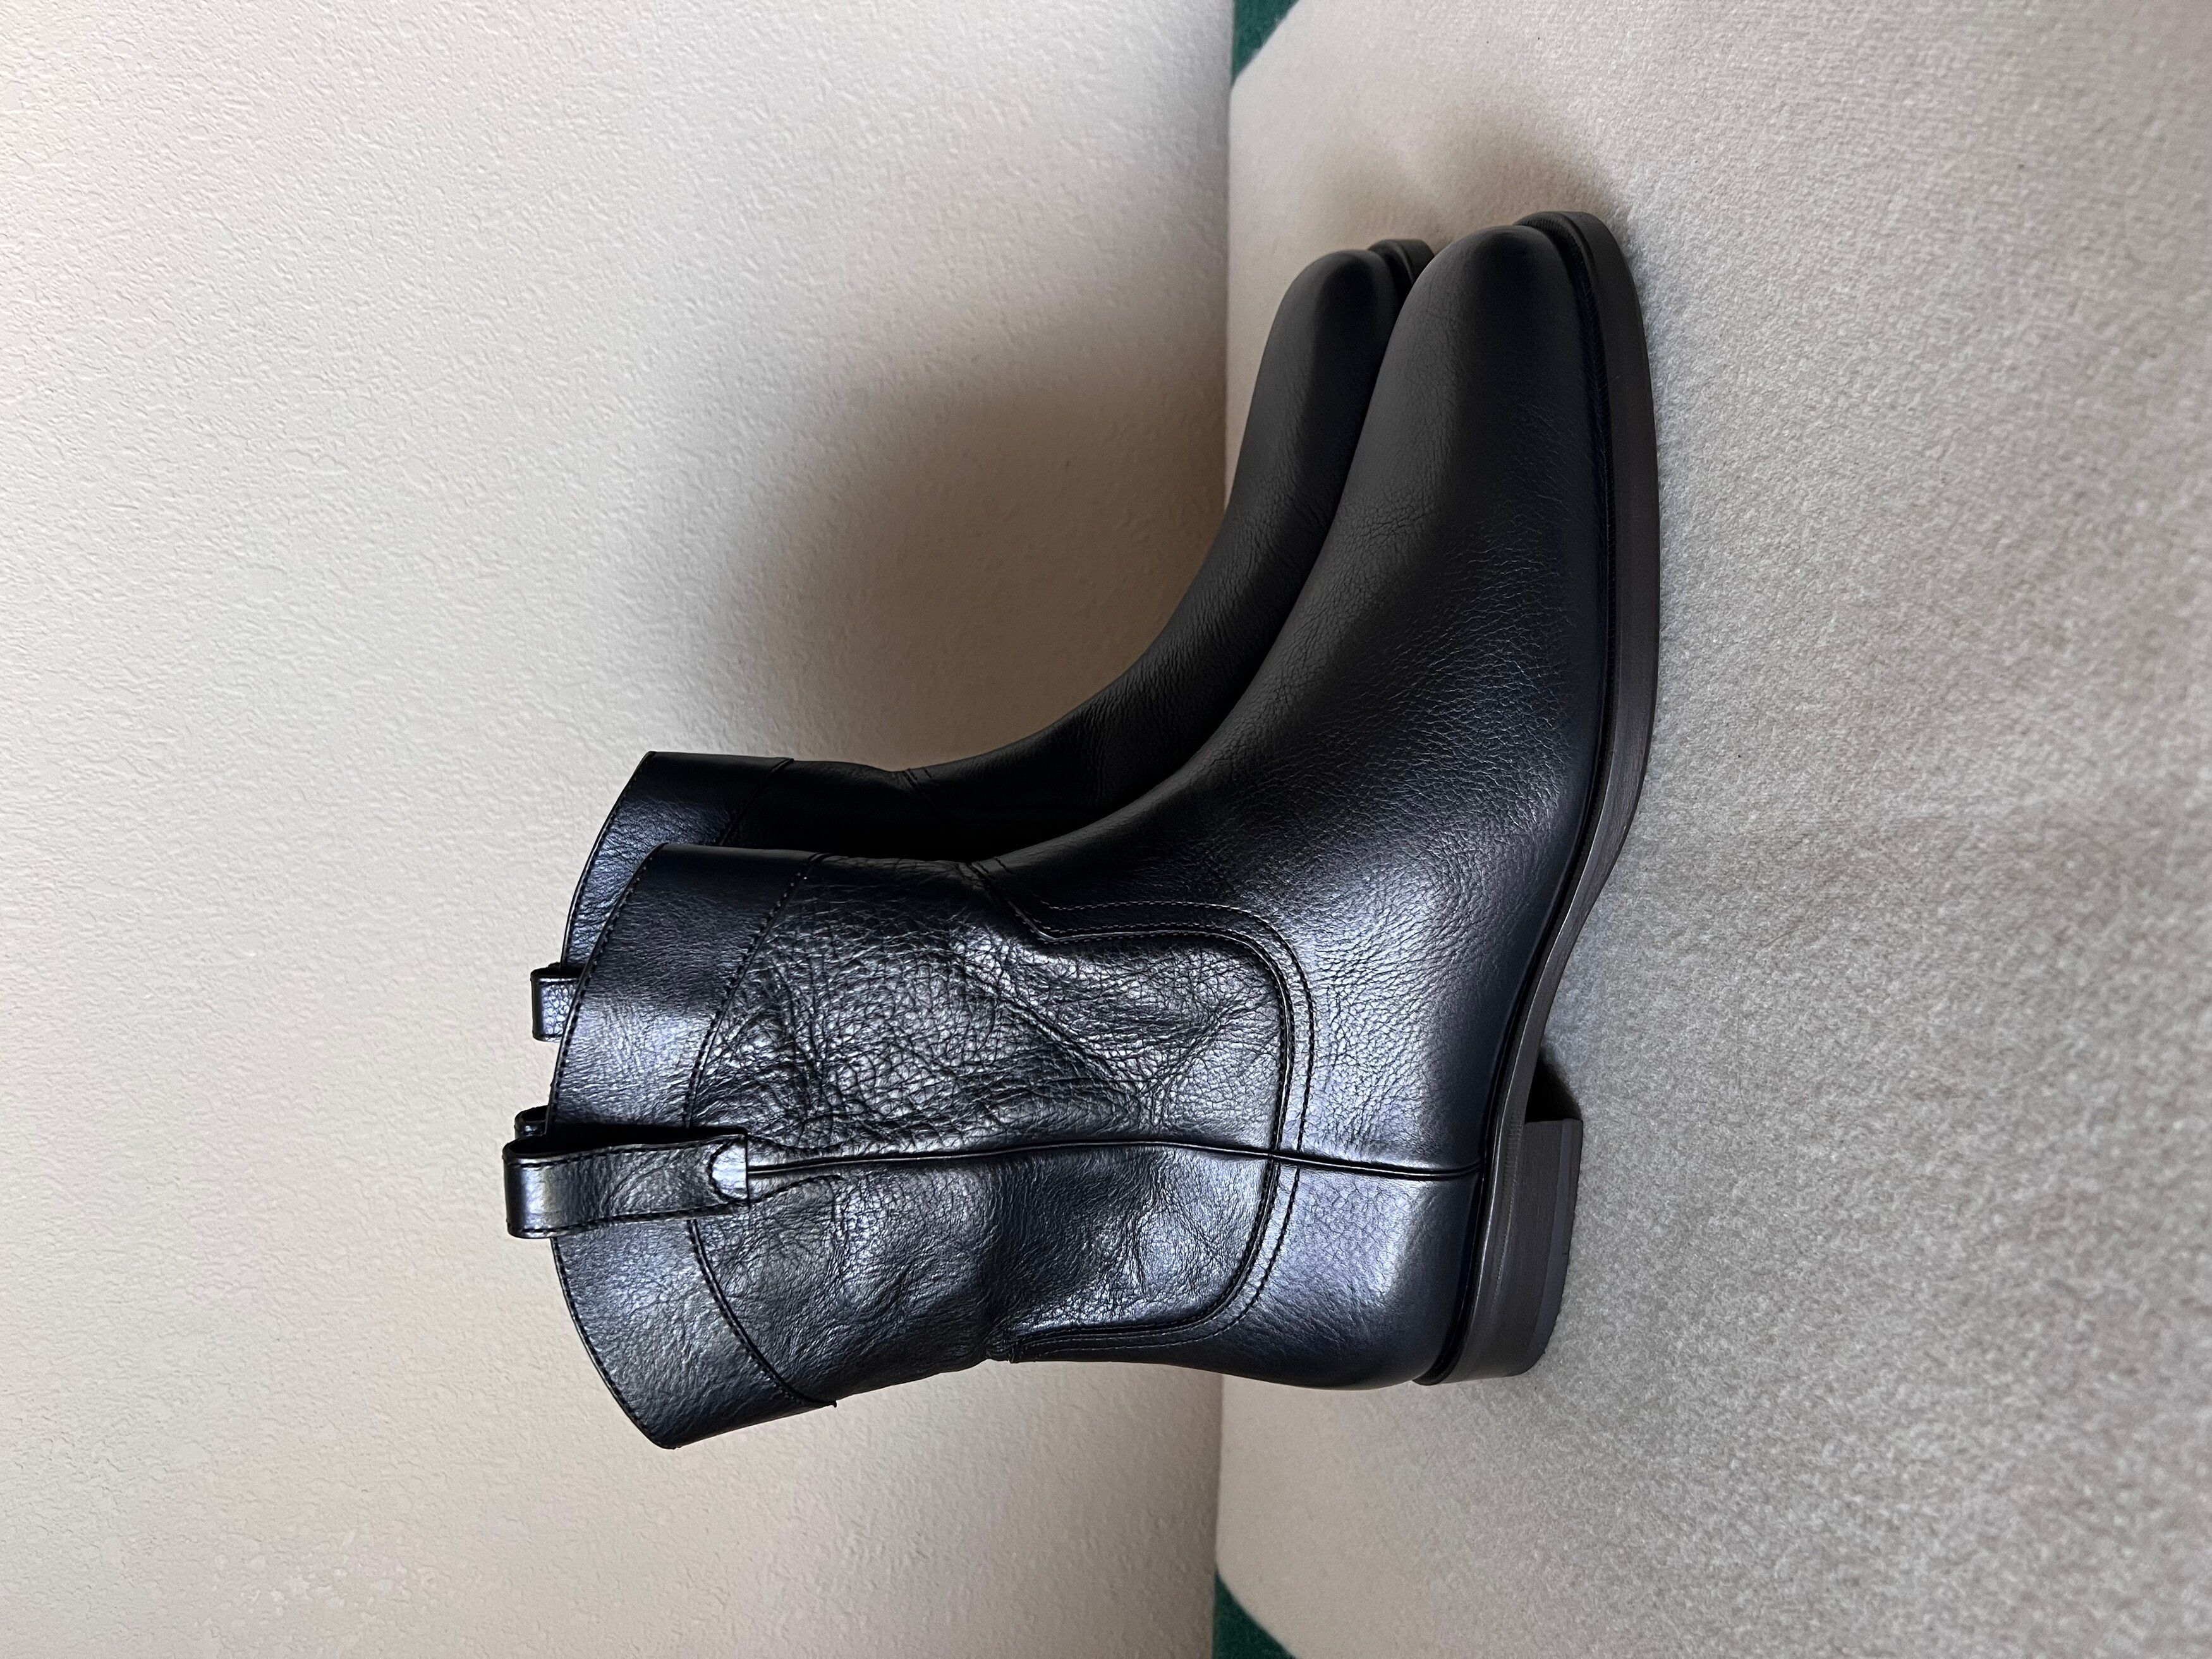 Lemaire Lemaire Leather Western Boots in Black | Grailed